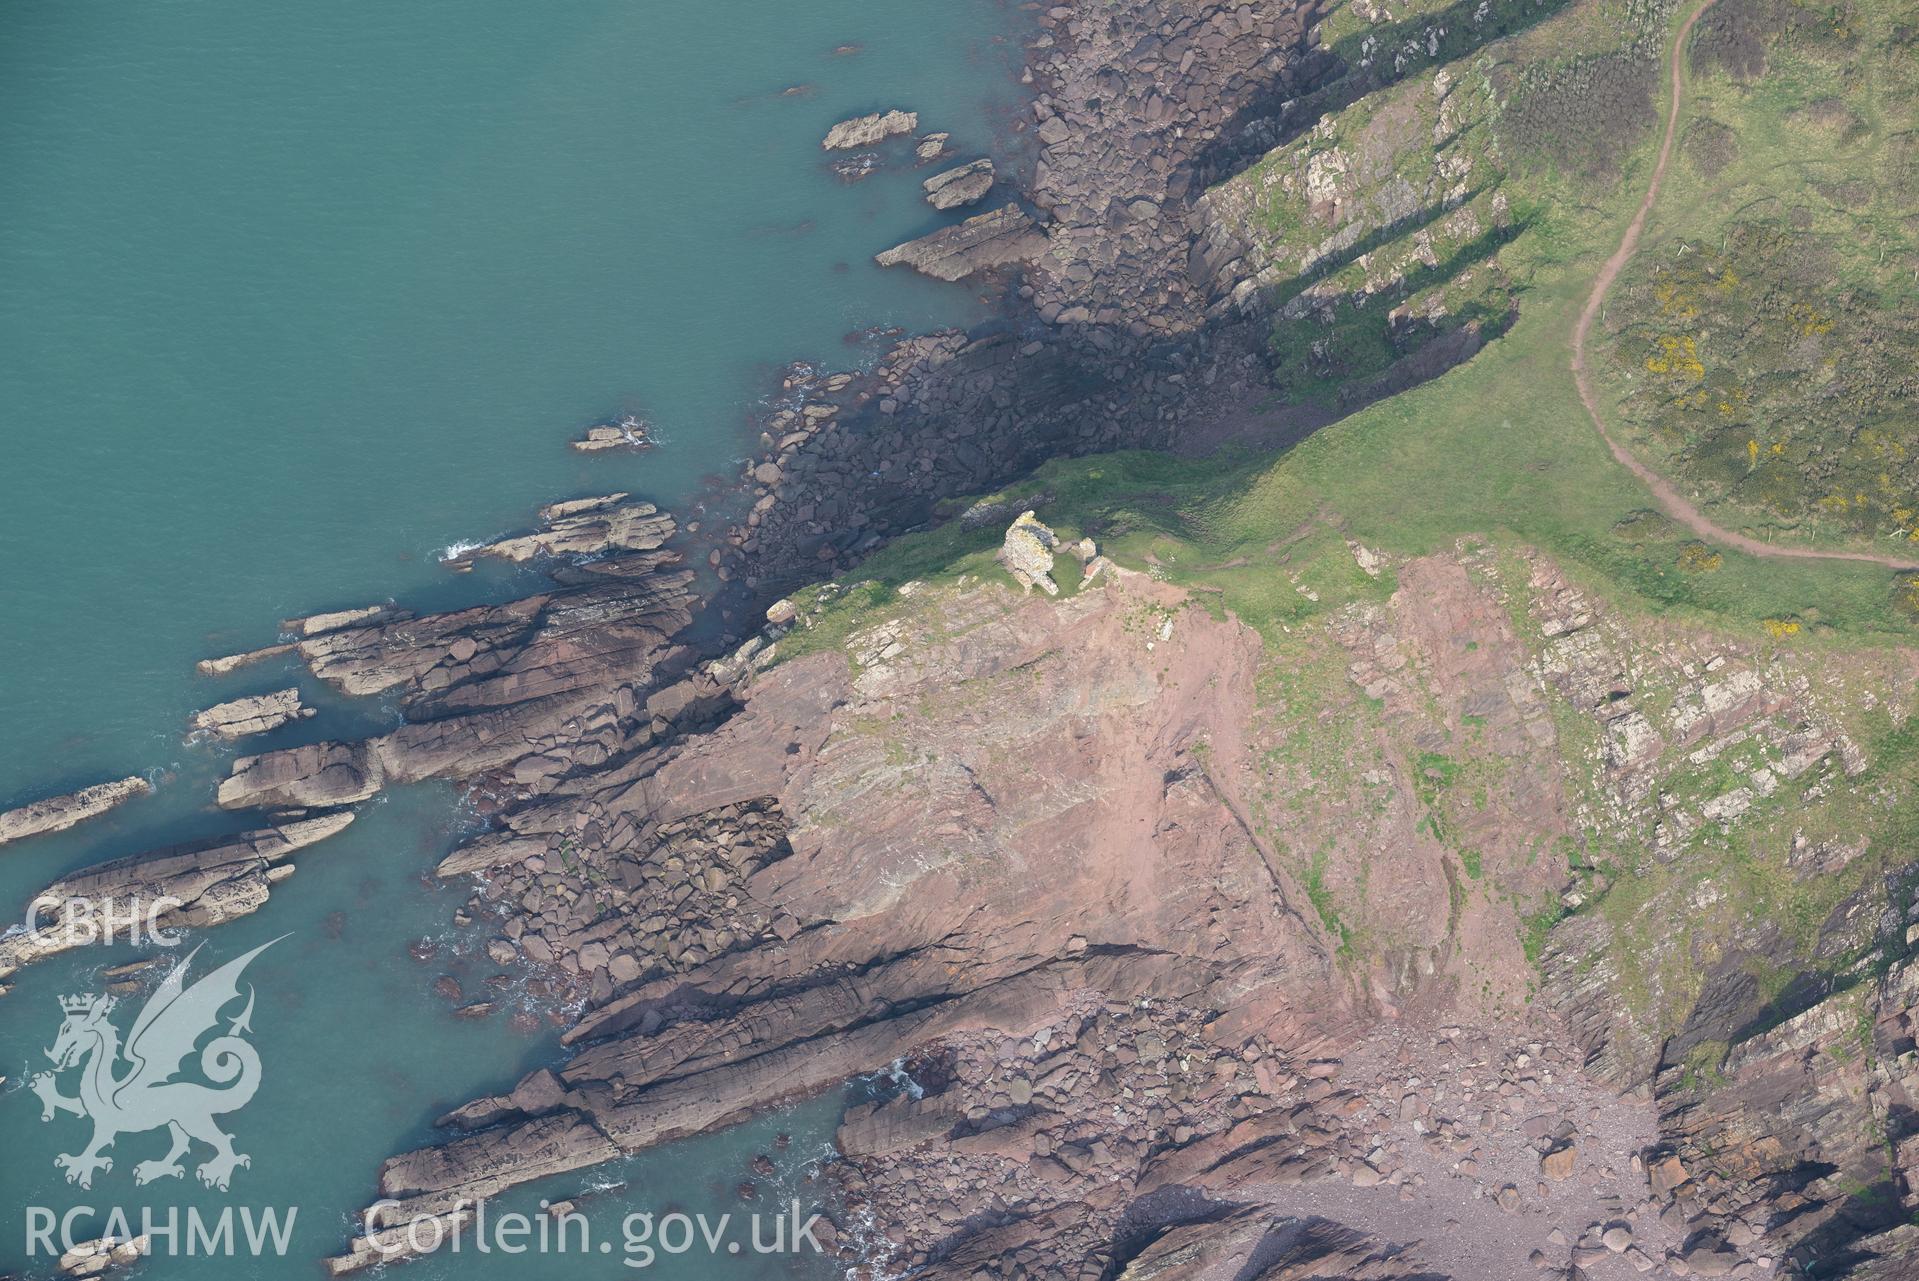 Aerial photography of East Blockhouse taken on 27th March 2017. Baseline aerial reconnaissance survey for the CHERISH Project. ? Crown: CHERISH PROJECT 2019. Produced with EU funds through the Ireland Wales Co-operation Programme 2014-2020. All material made freely available through the Open Government Licence.